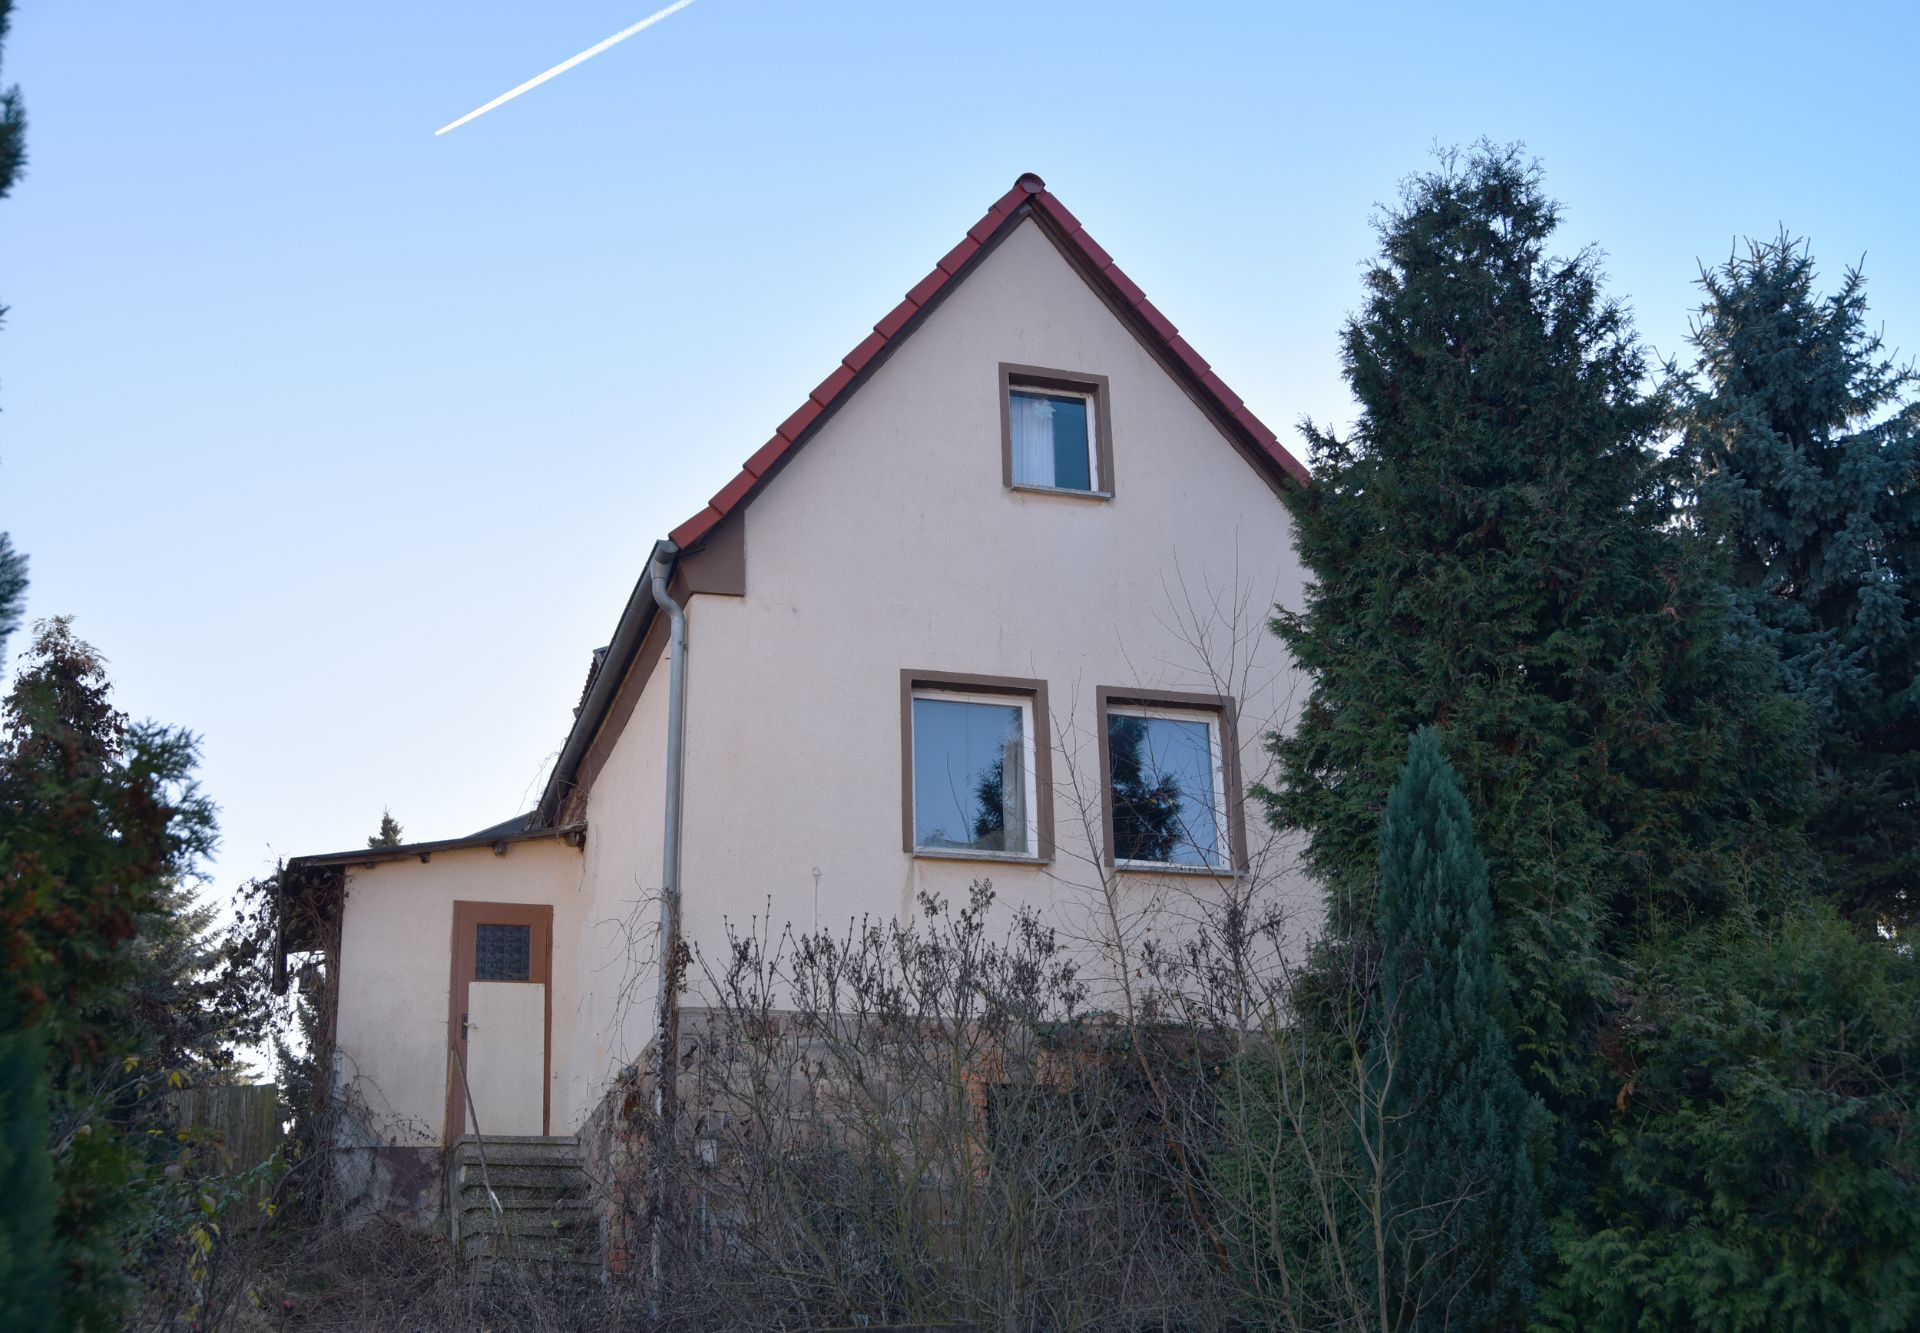 LARGE FREEHOLD HOUSE AND LAND IN SAXONY-ANHALT, GERMANY - Image 2 of 60